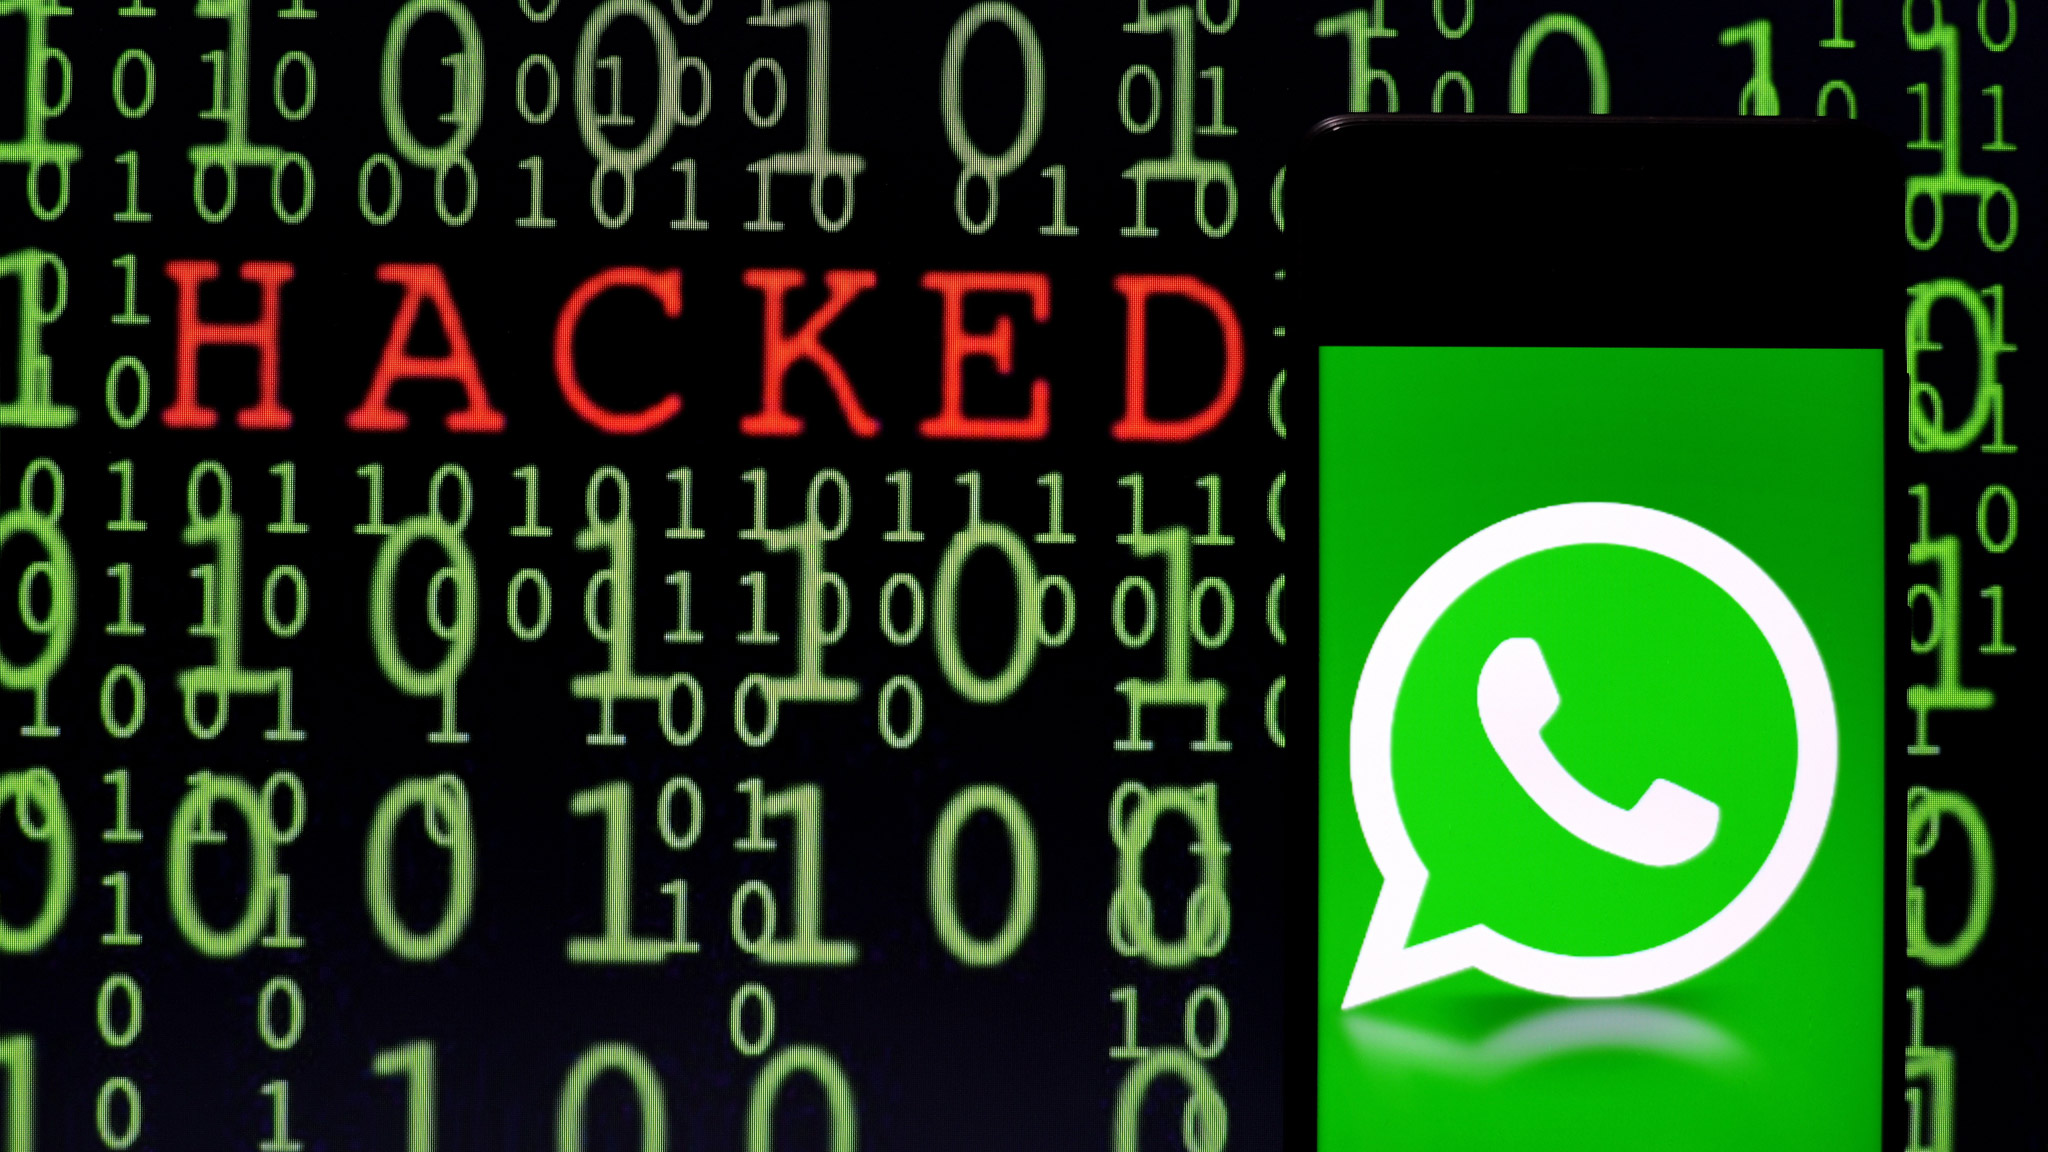 Whatsapp: The vulnerability allows monitoring of the status of the Internet connection